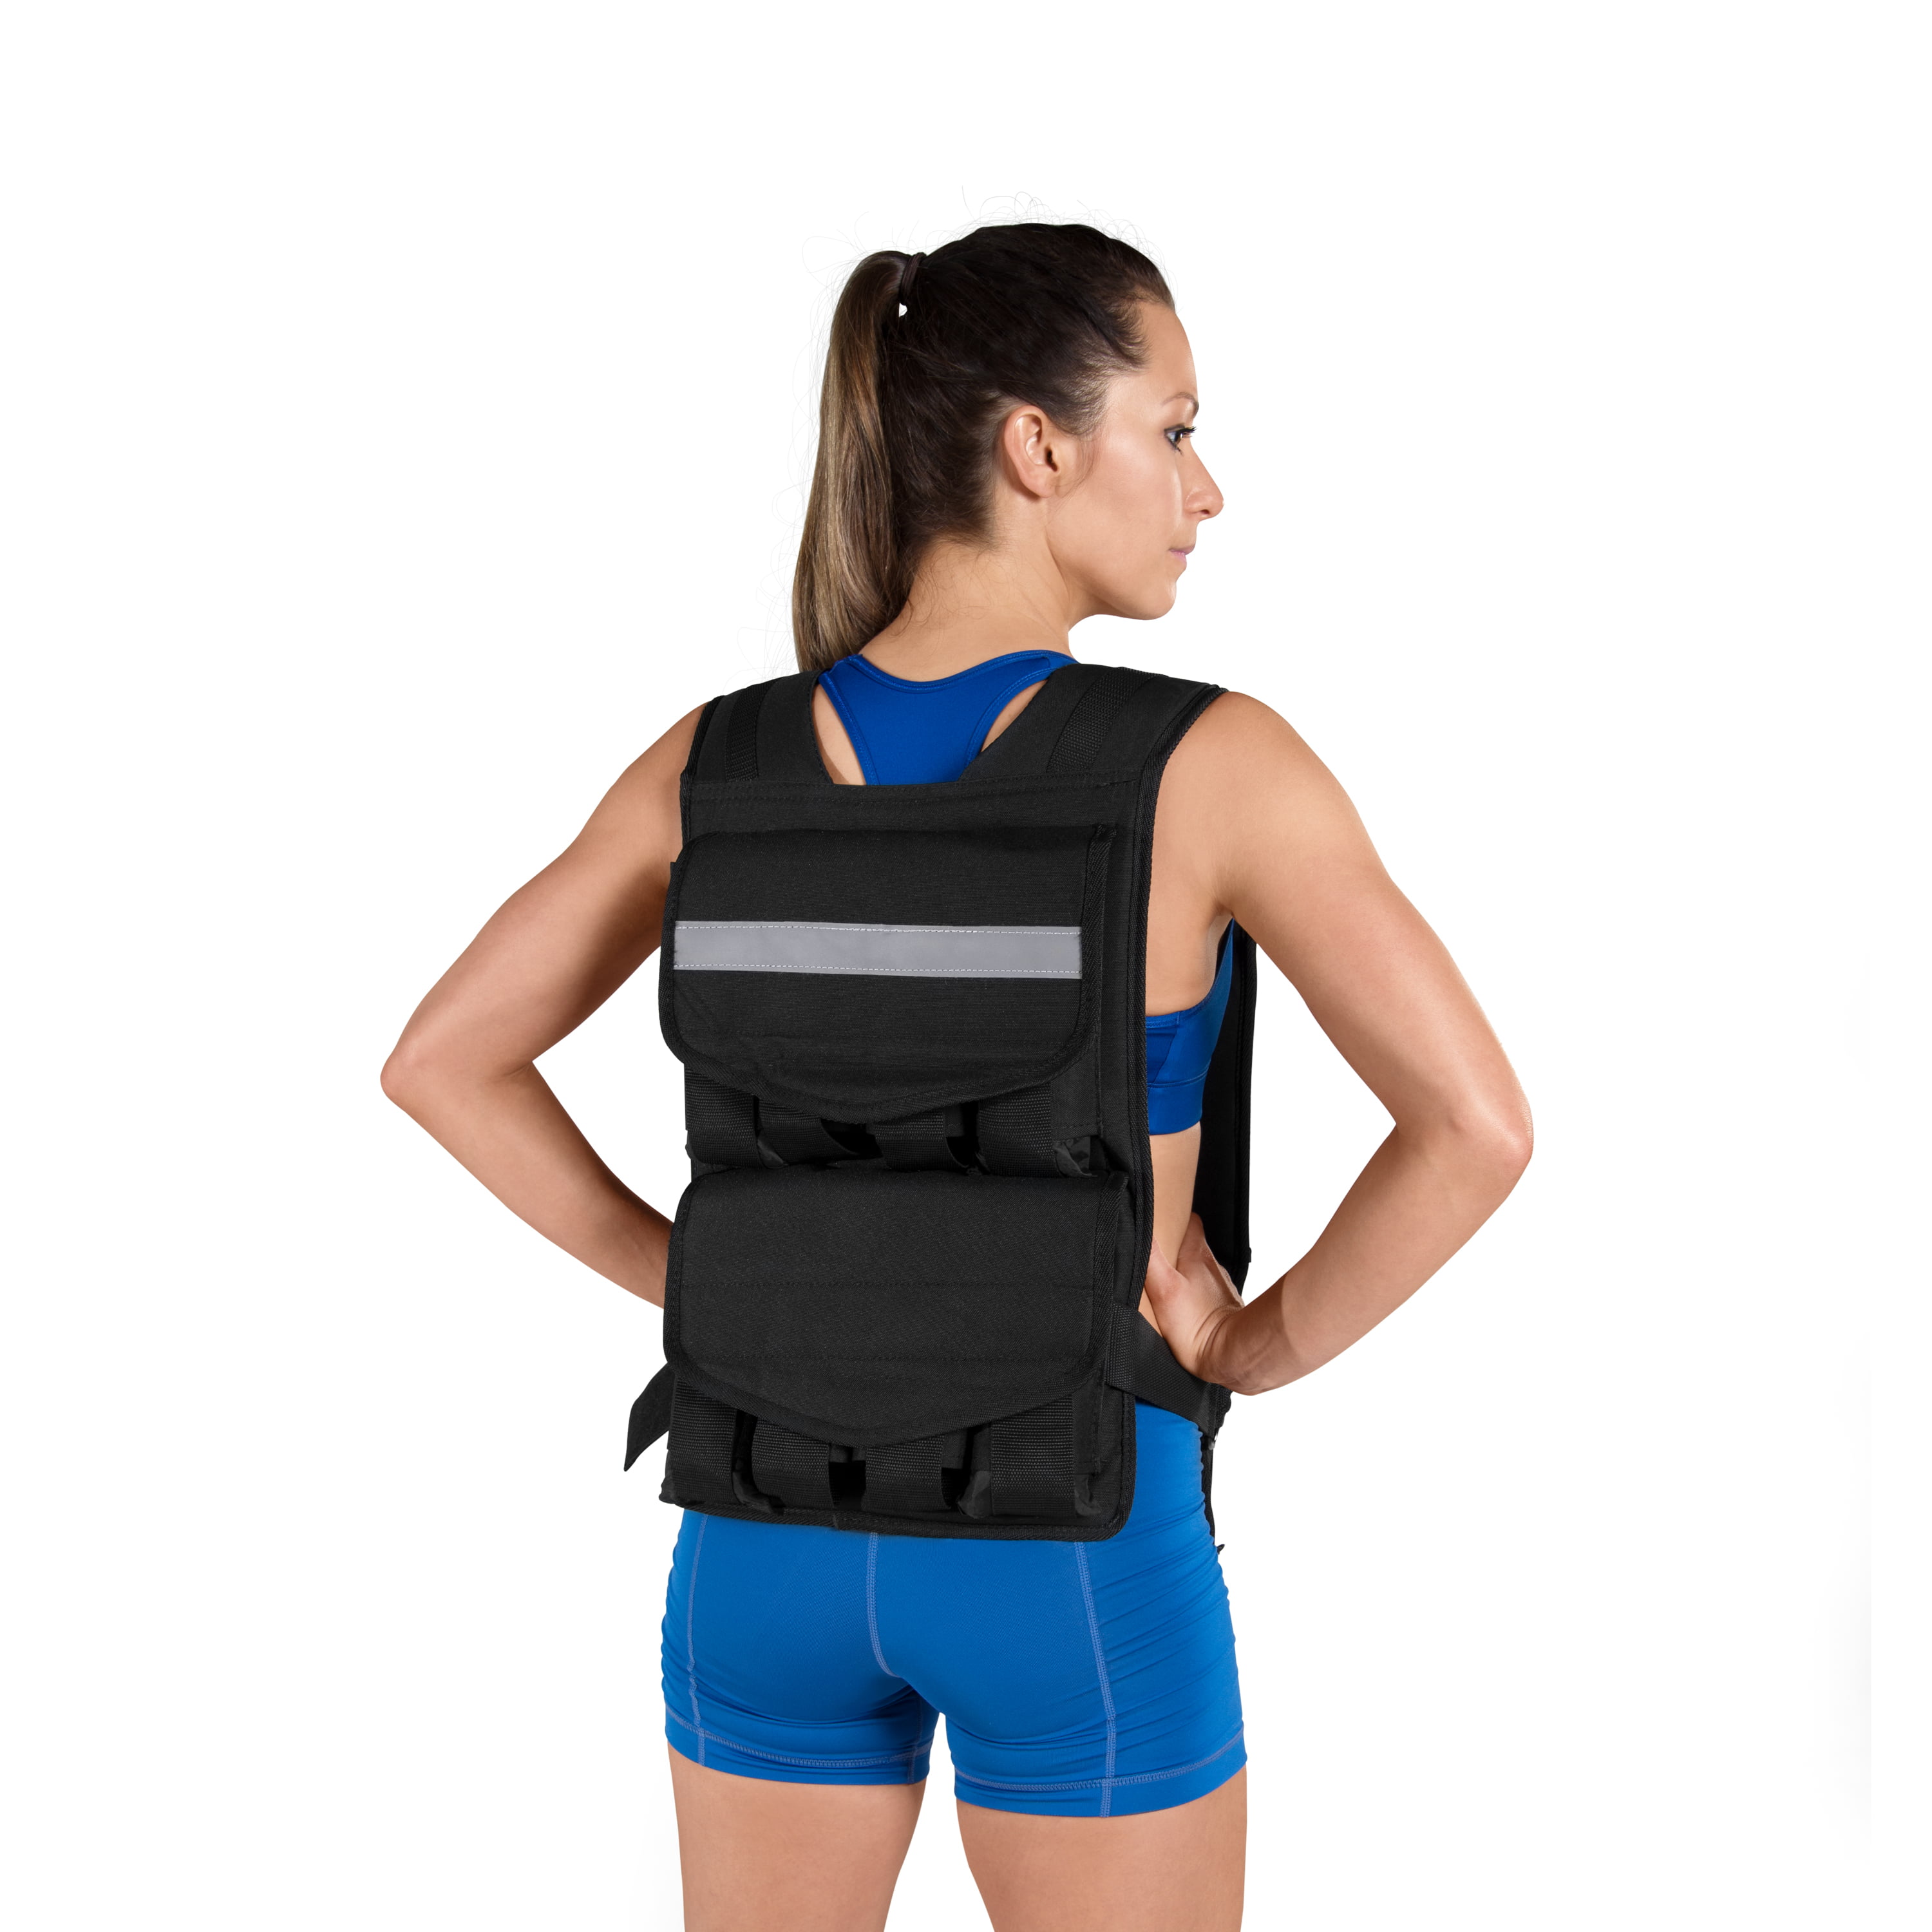 Weighted Vest 40lb – Corefx